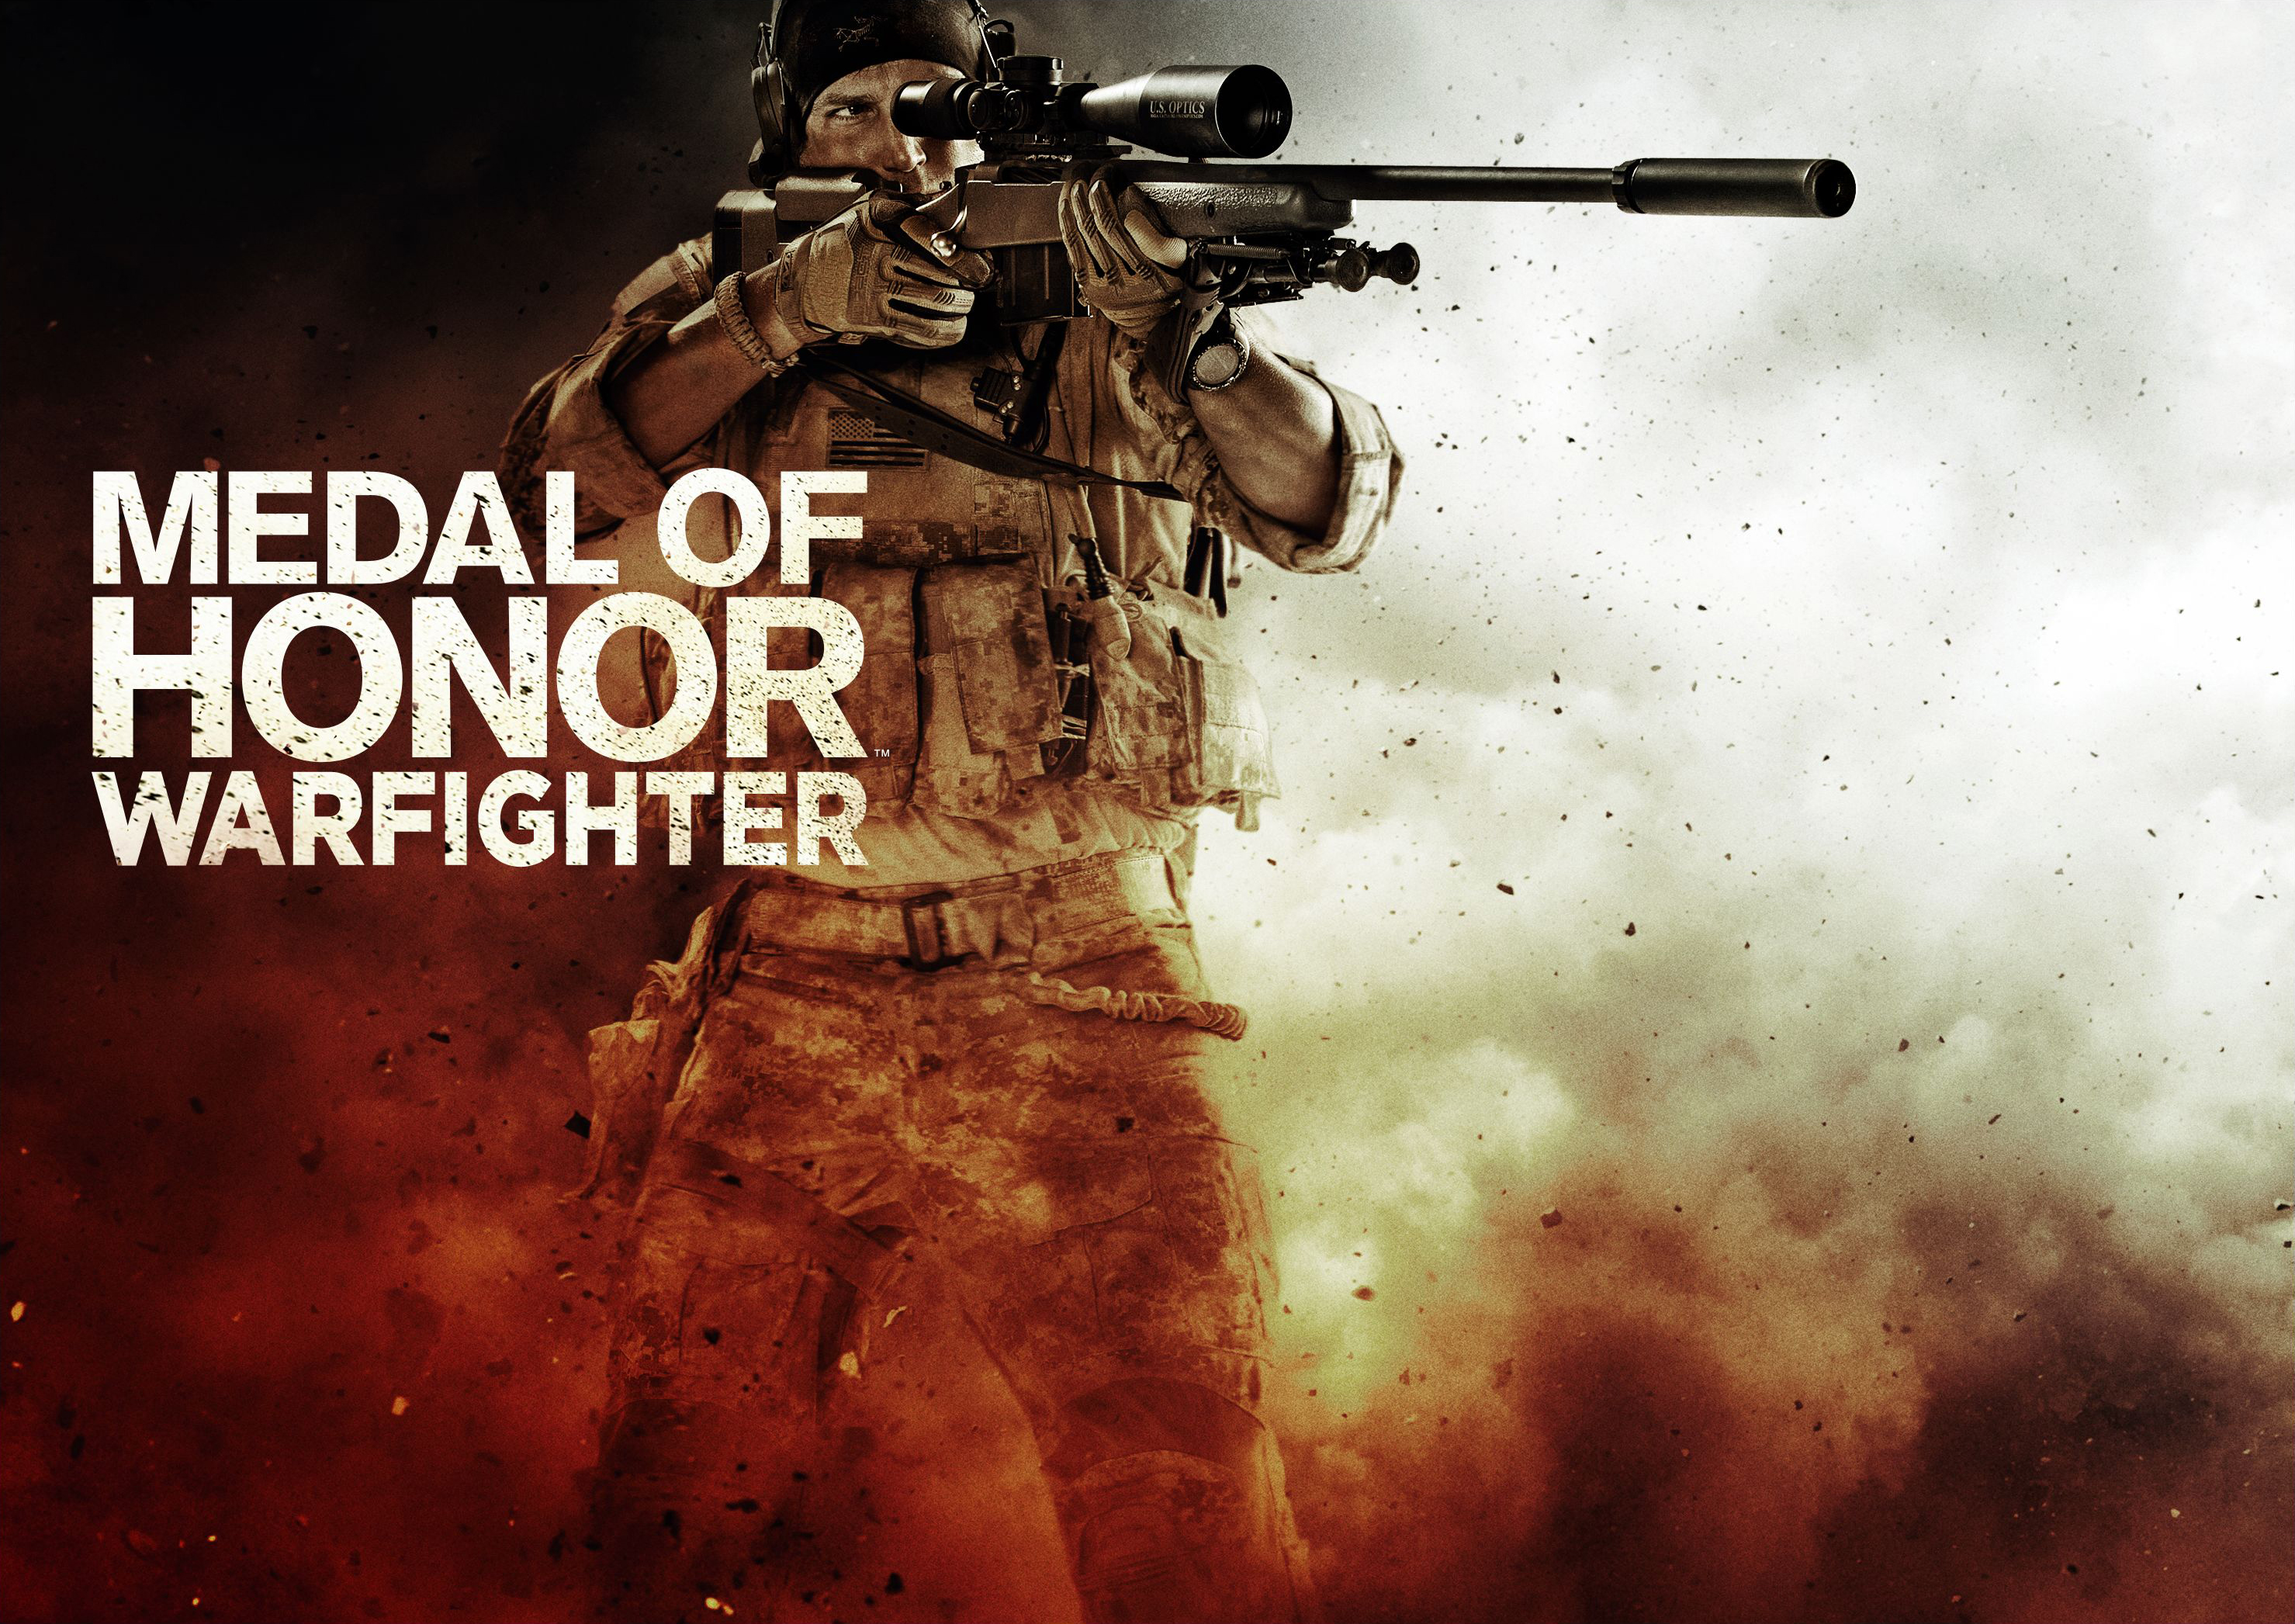 Video Game Medal Of Honor Warfighter 2958x2093